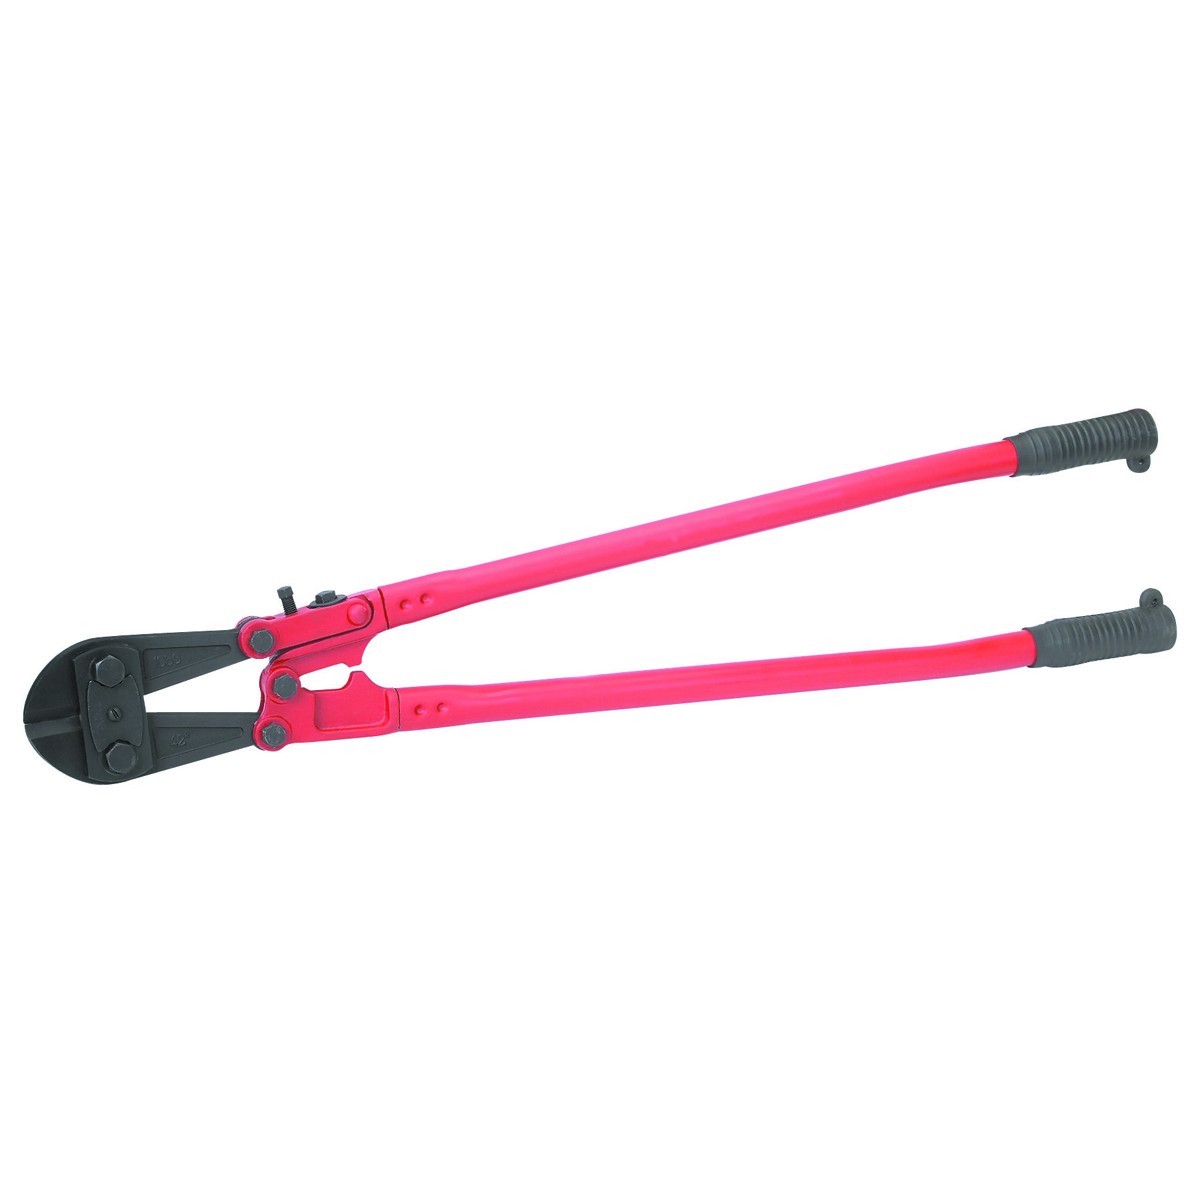 New   Pittsburgh  Red 42 in. Bolt Cutters